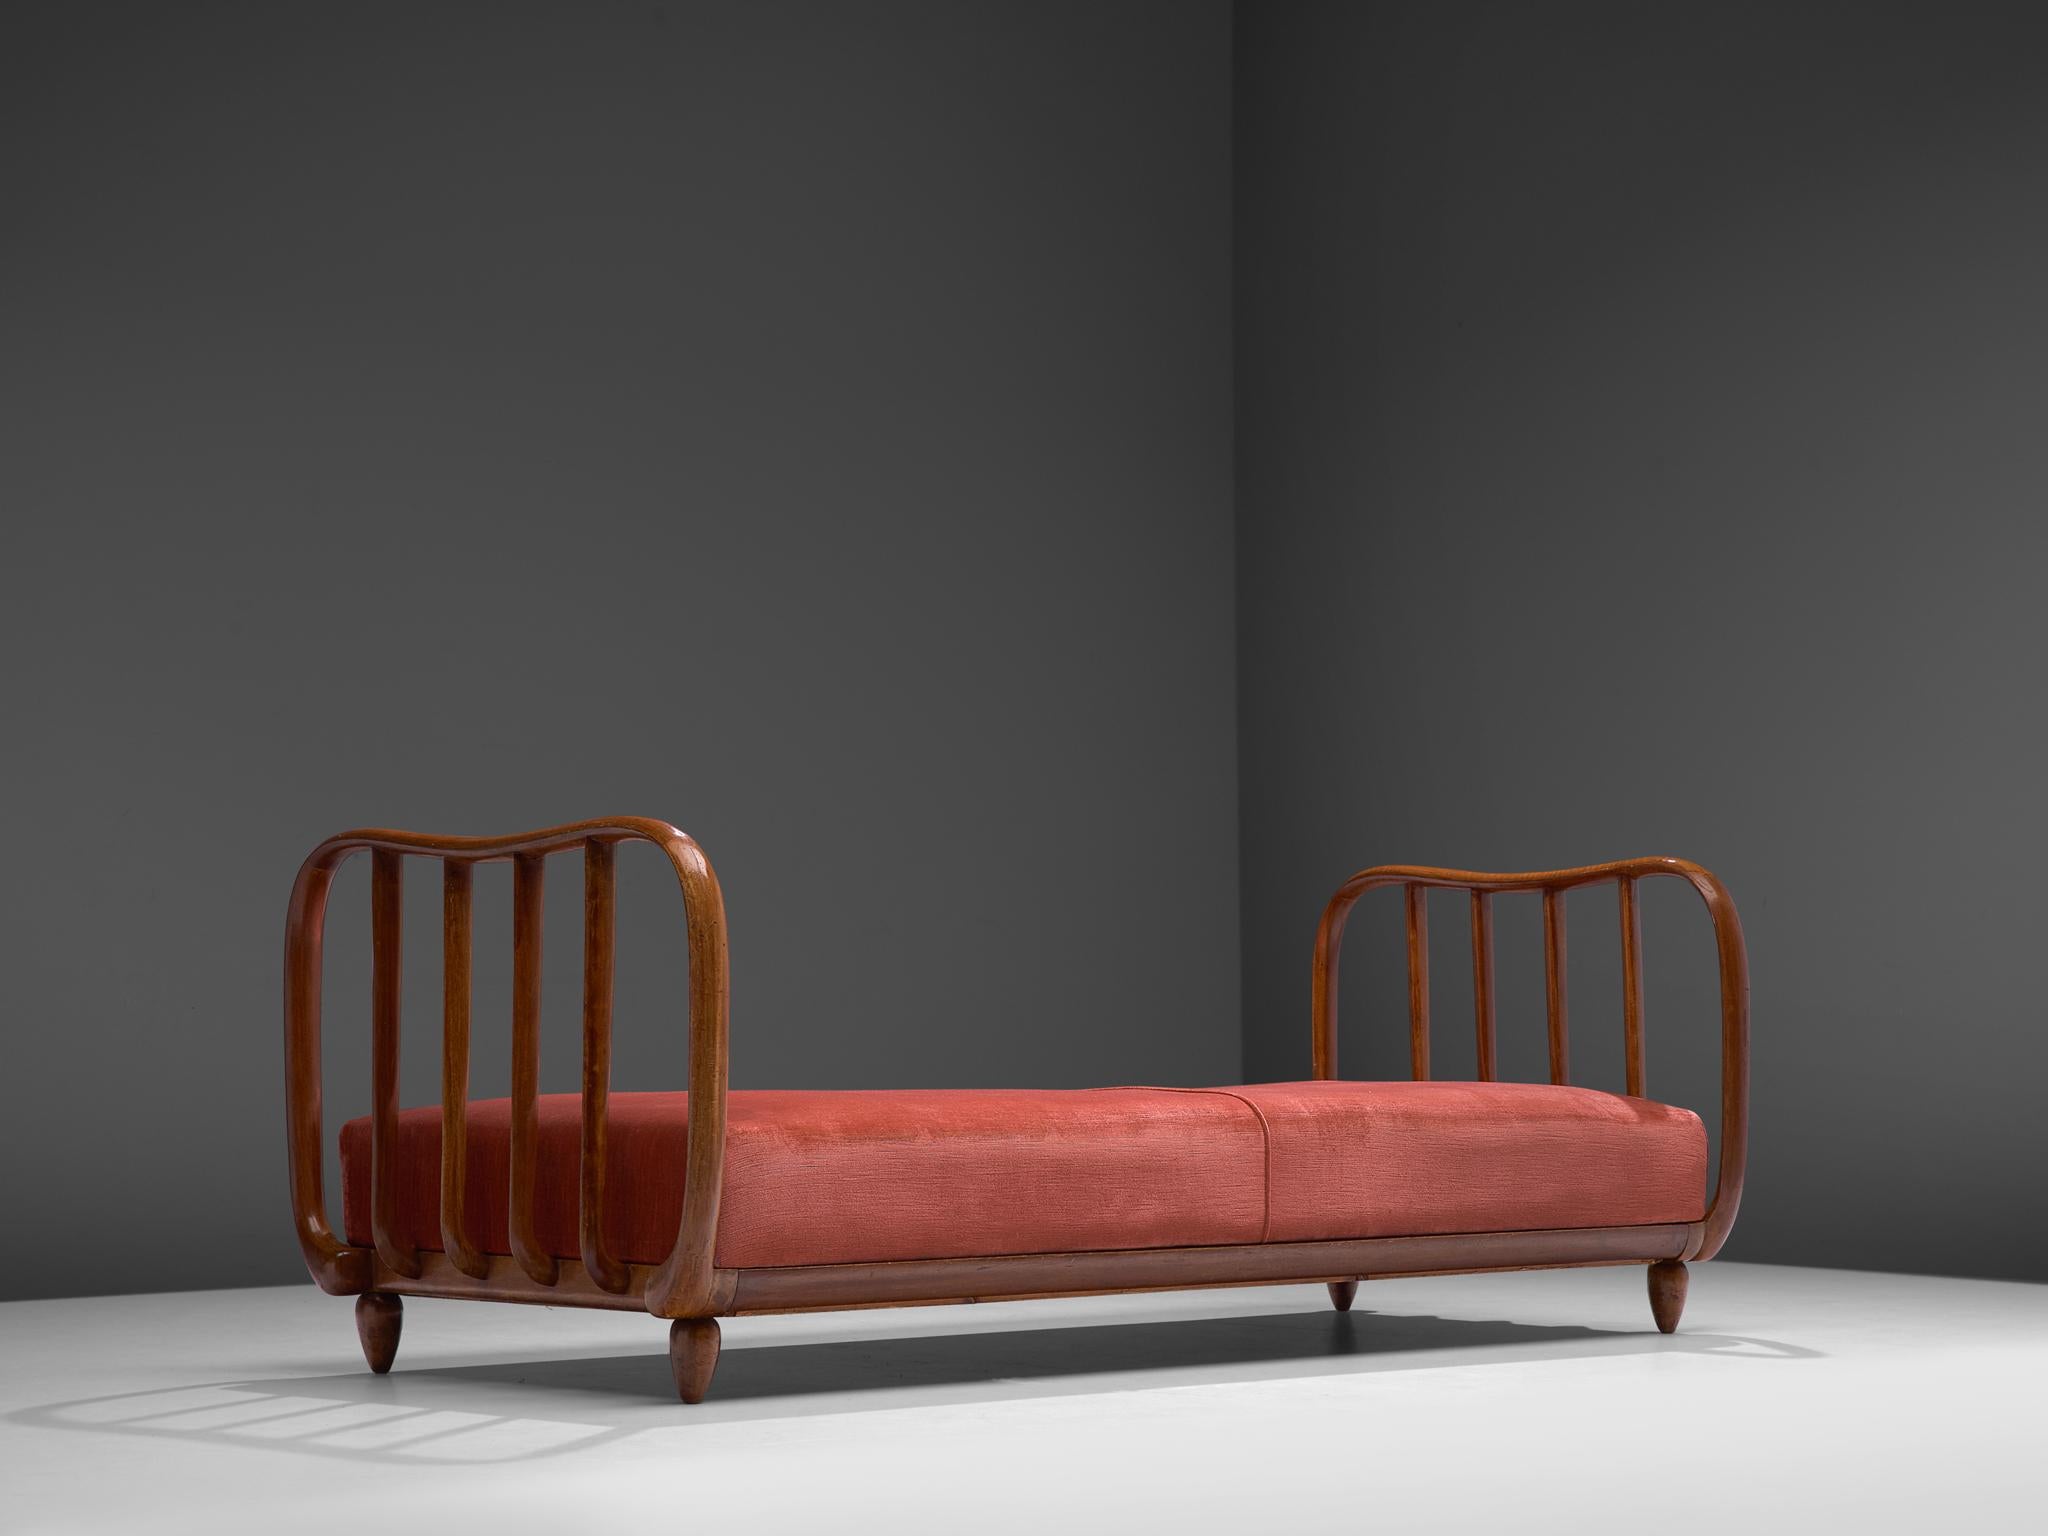 Italian Art Deco Daybed with Coral Upholstery, 1940s (Art déco)